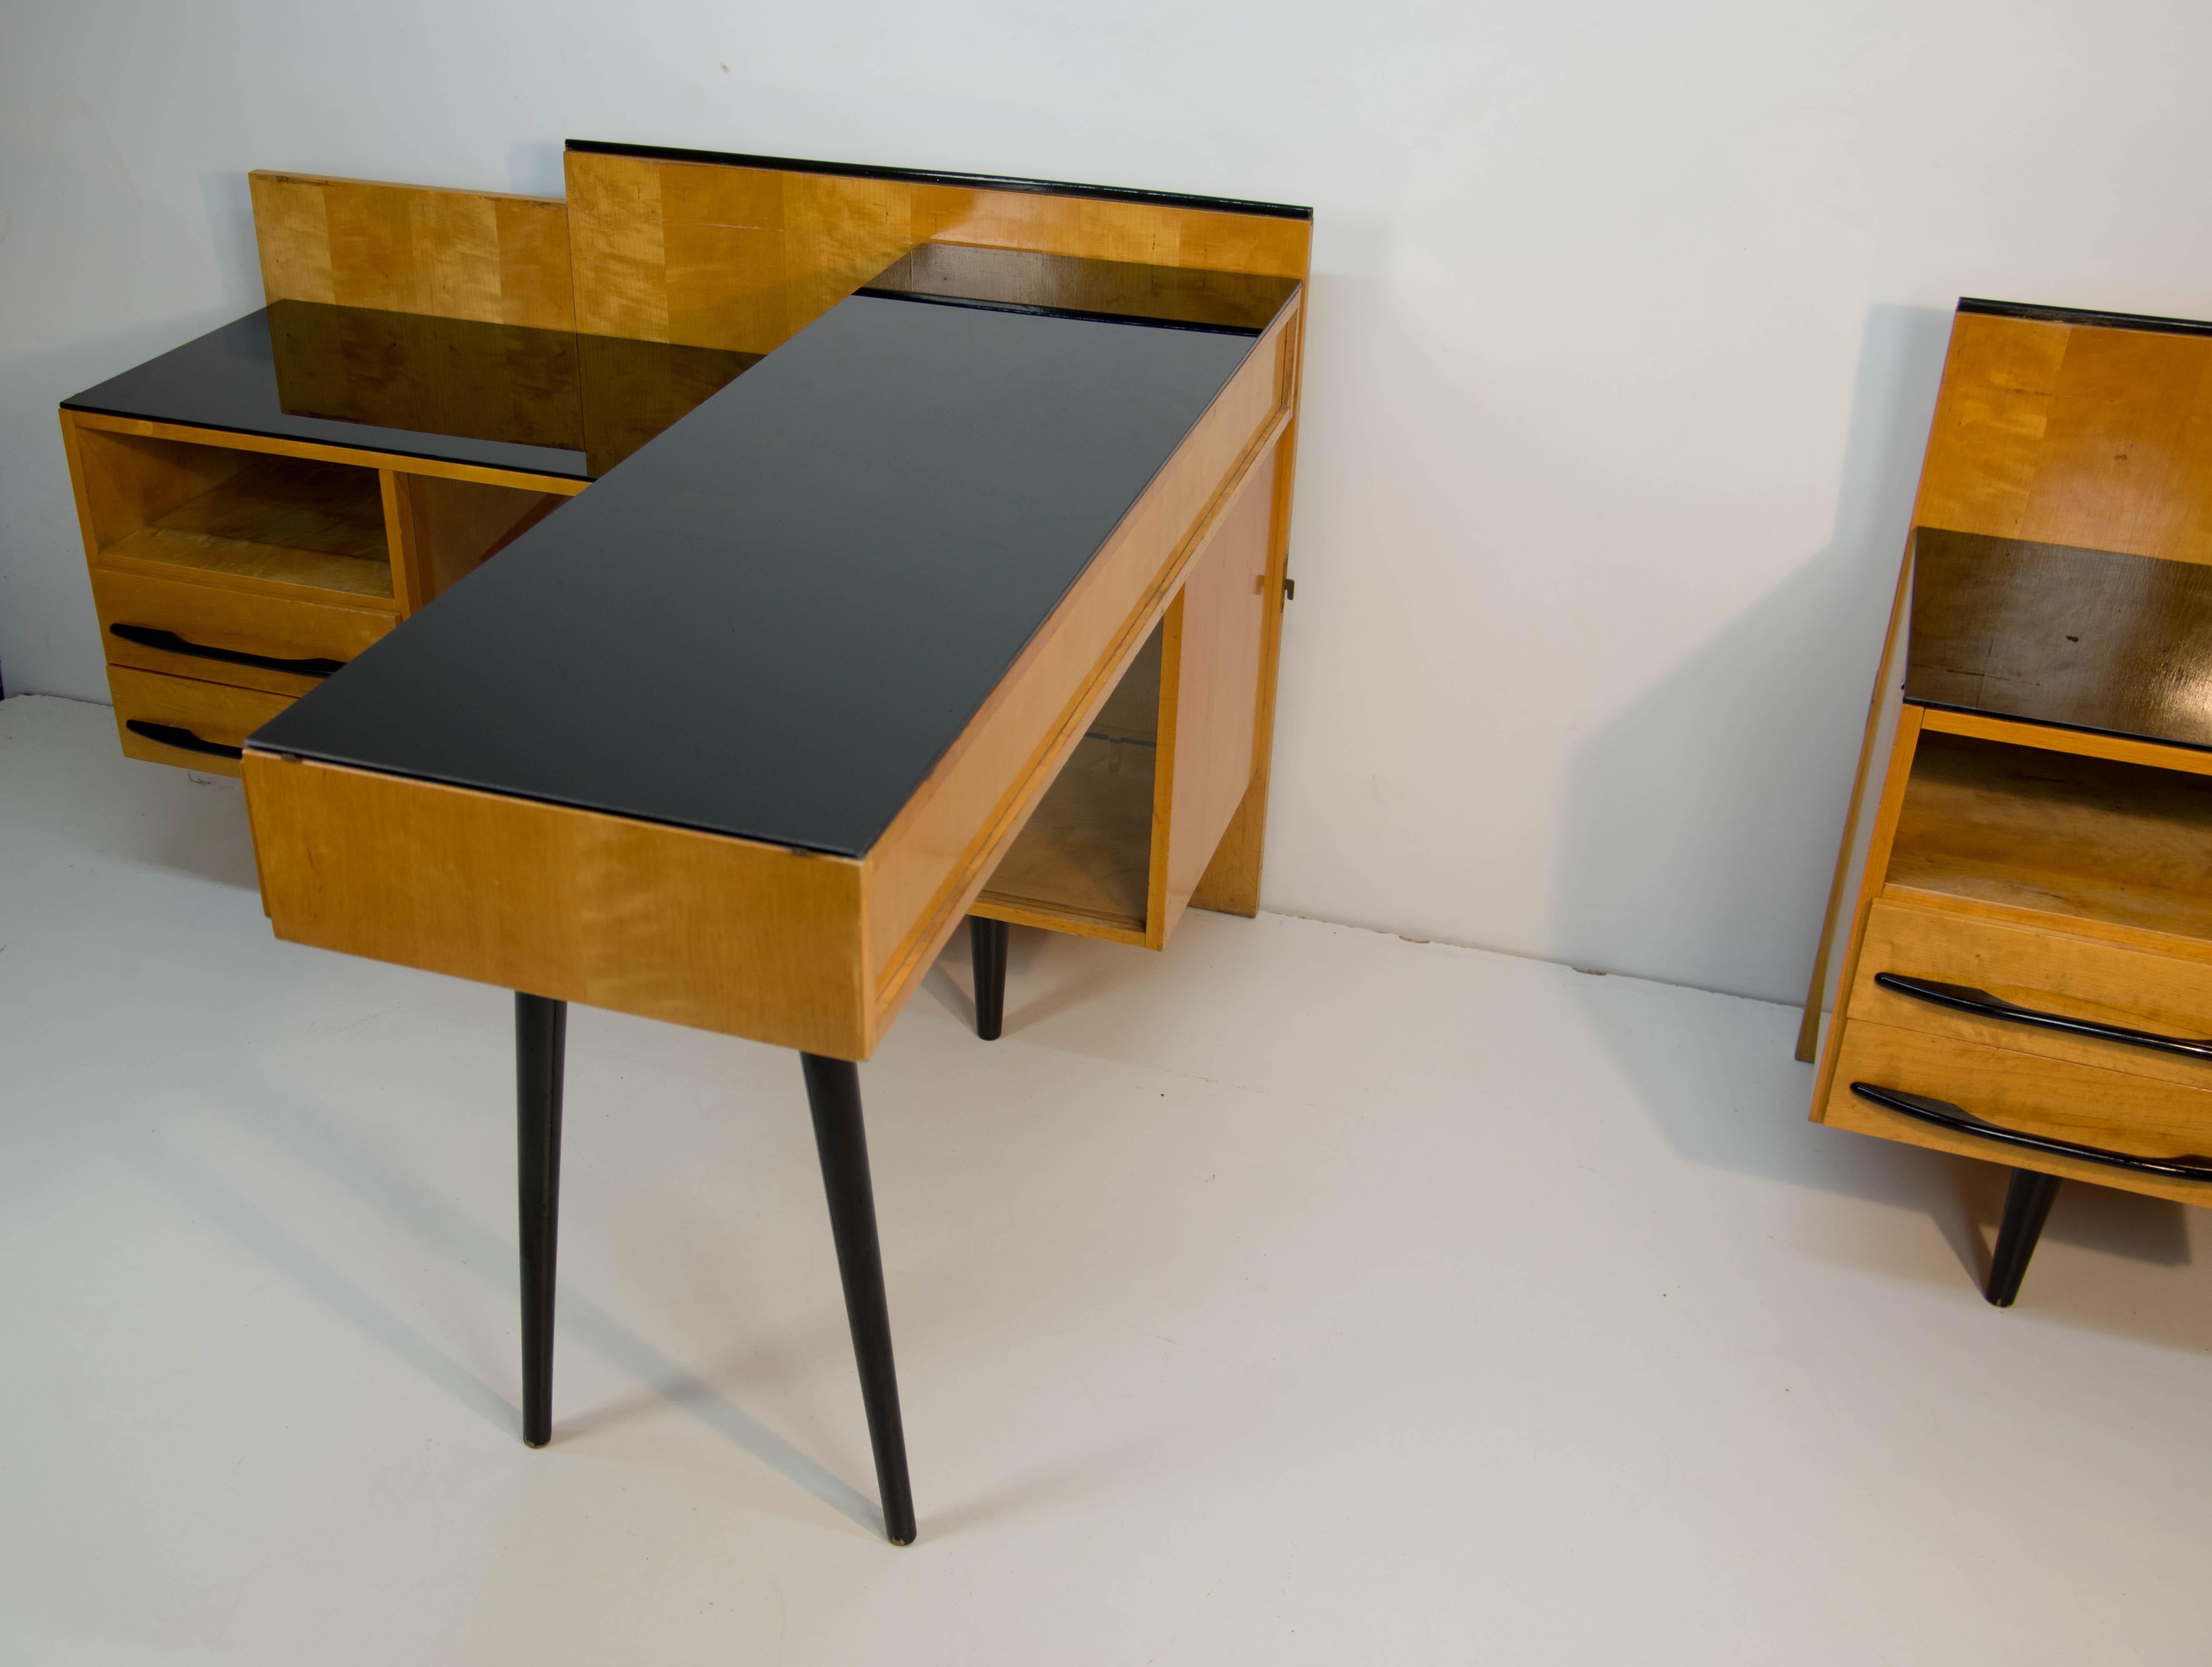 Czech Modular Set of Table, Nightstand and Chest of Drawers by M. Pozar, 1960s For Sale